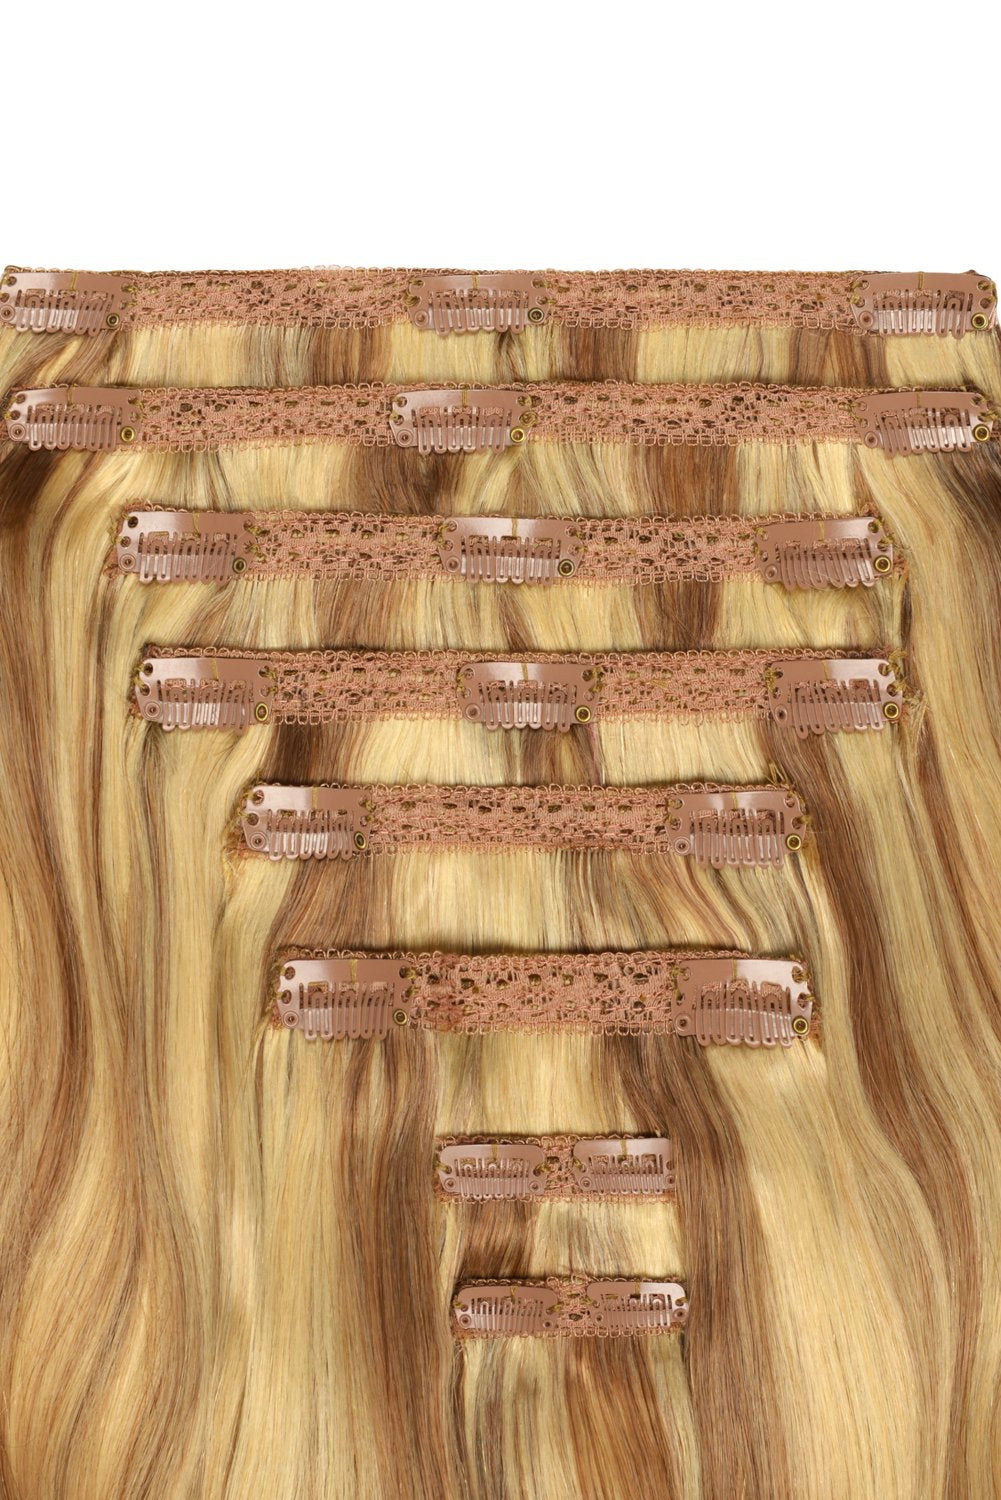 Double Wefted Full Head Remy Clip in Human Hair Extensions - Butterscotch Blonde (#10/16)